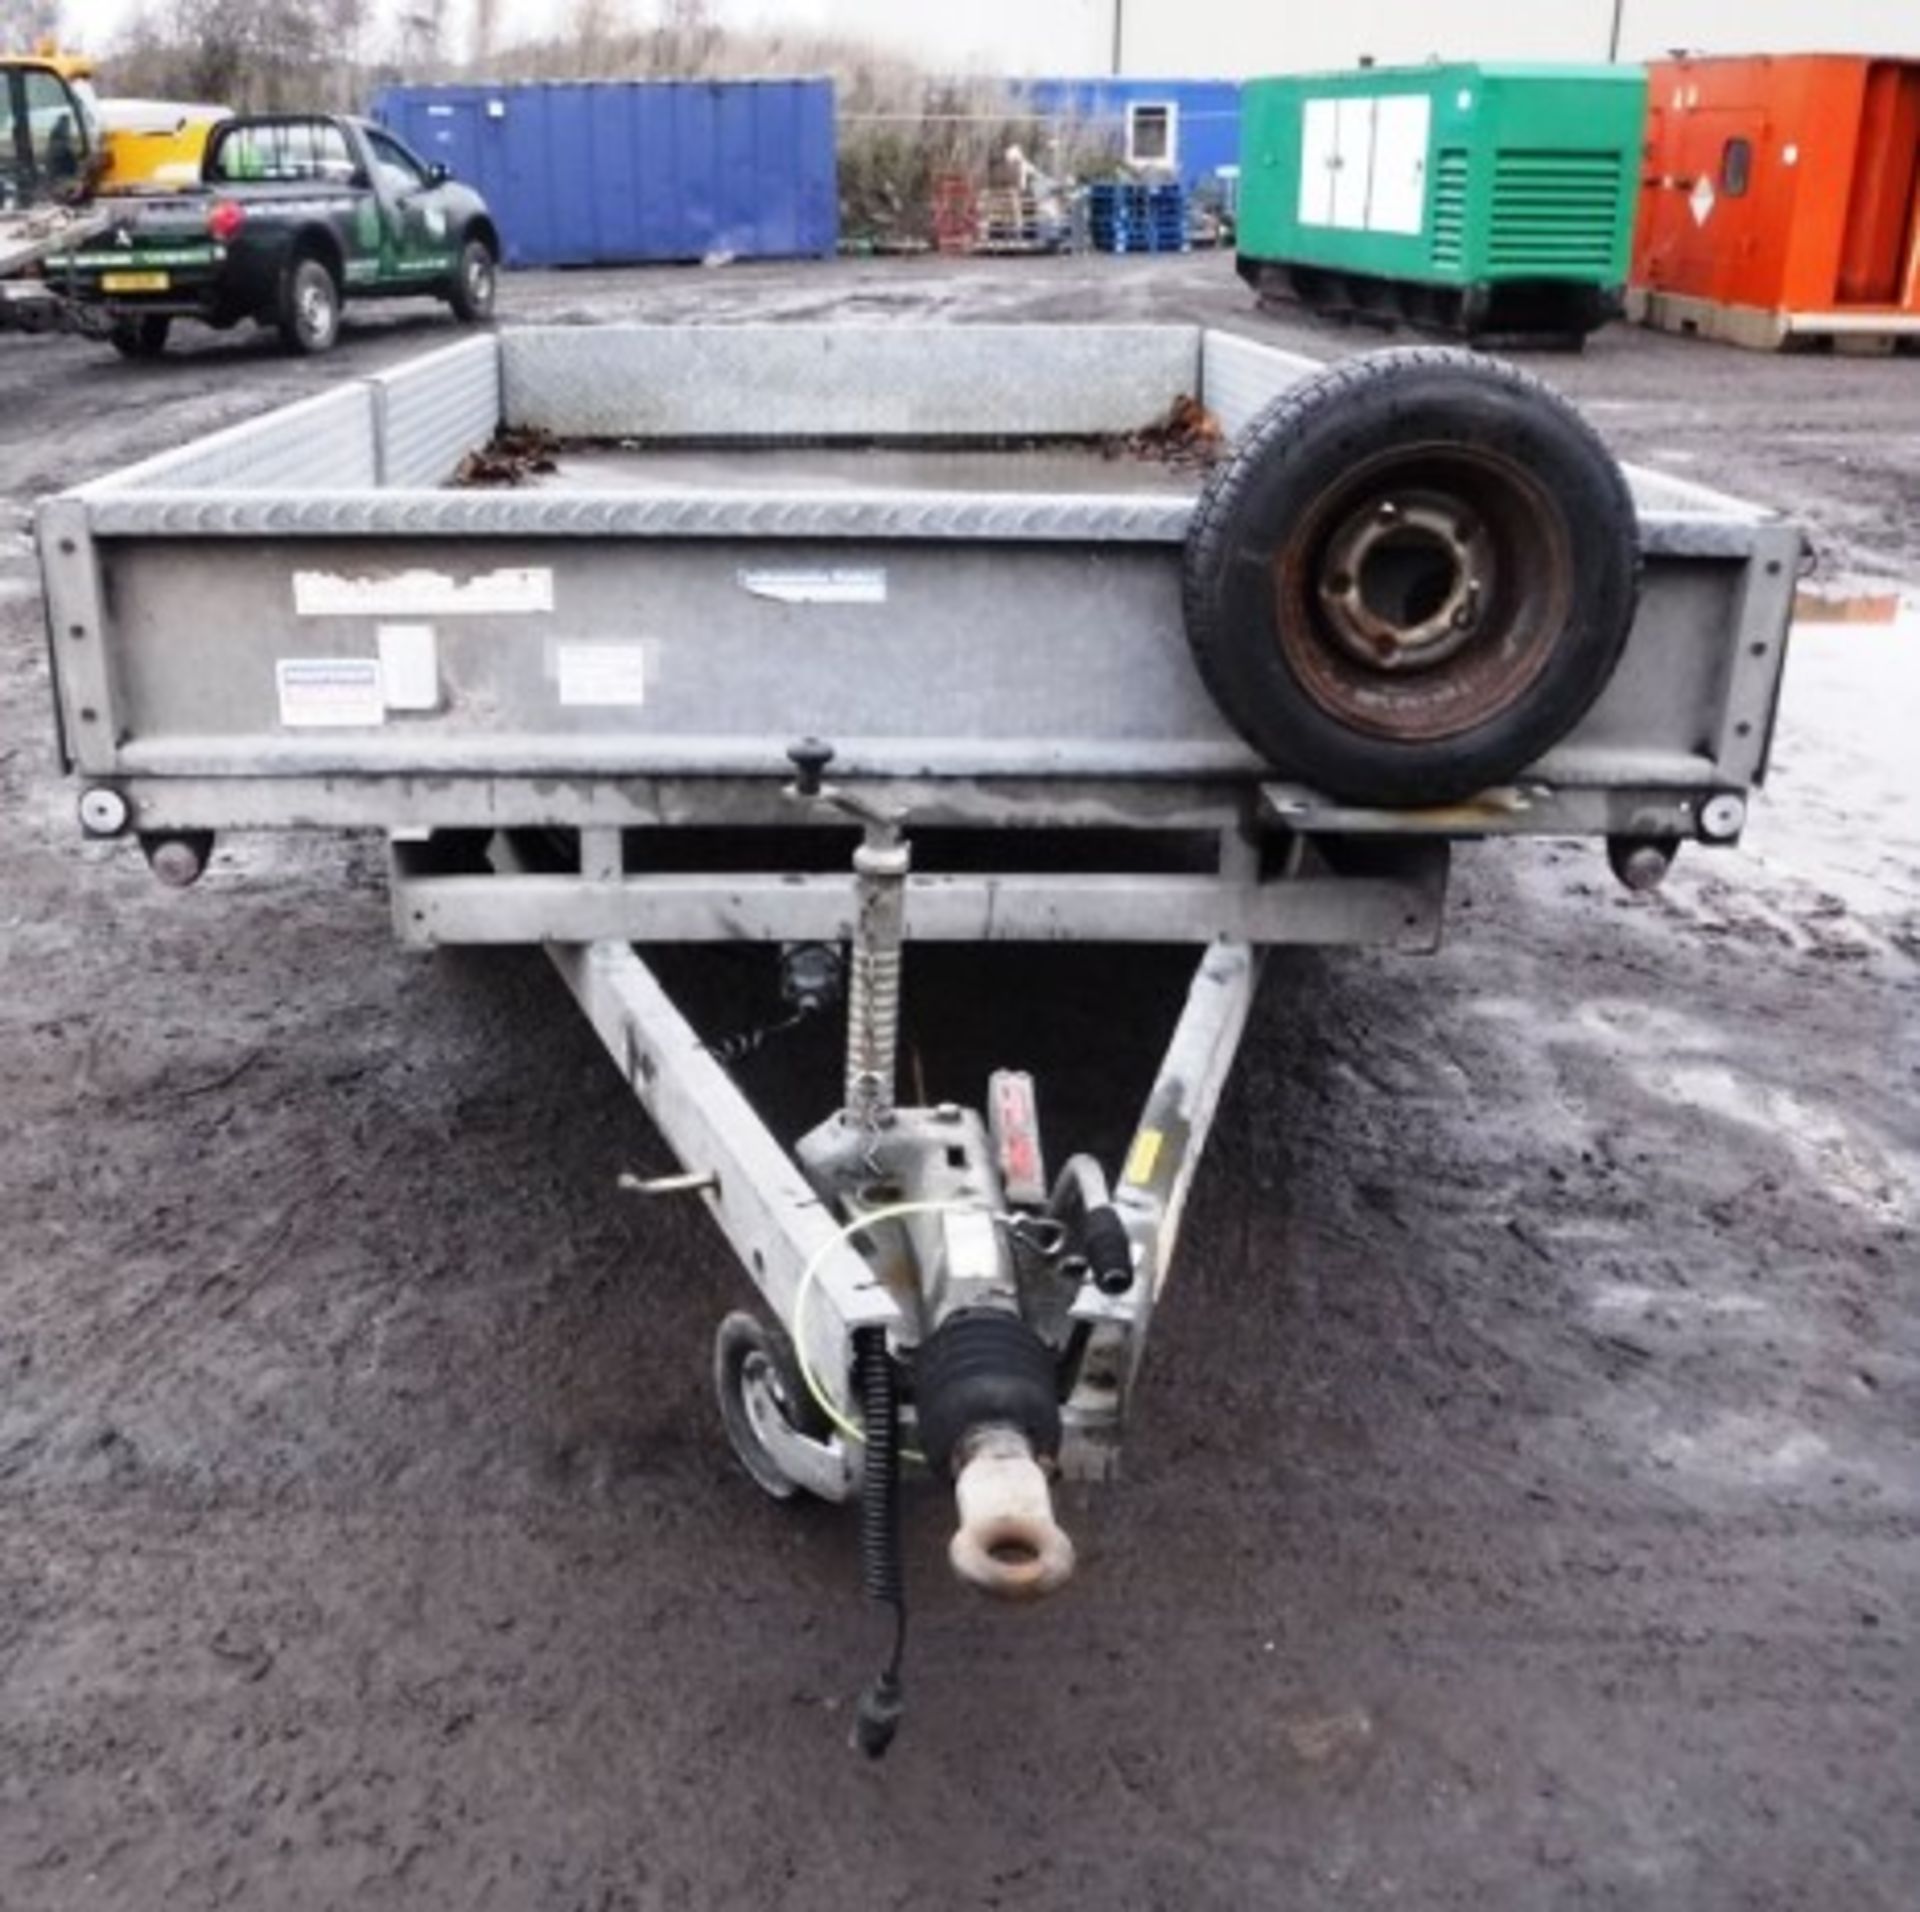 INDESPENSION CHALLANGER 12' X 6' TWIN AXLE DROPSIDE TRAILER. VIN G-056177. ASSEST NO. 758-1316 - Image 2 of 6